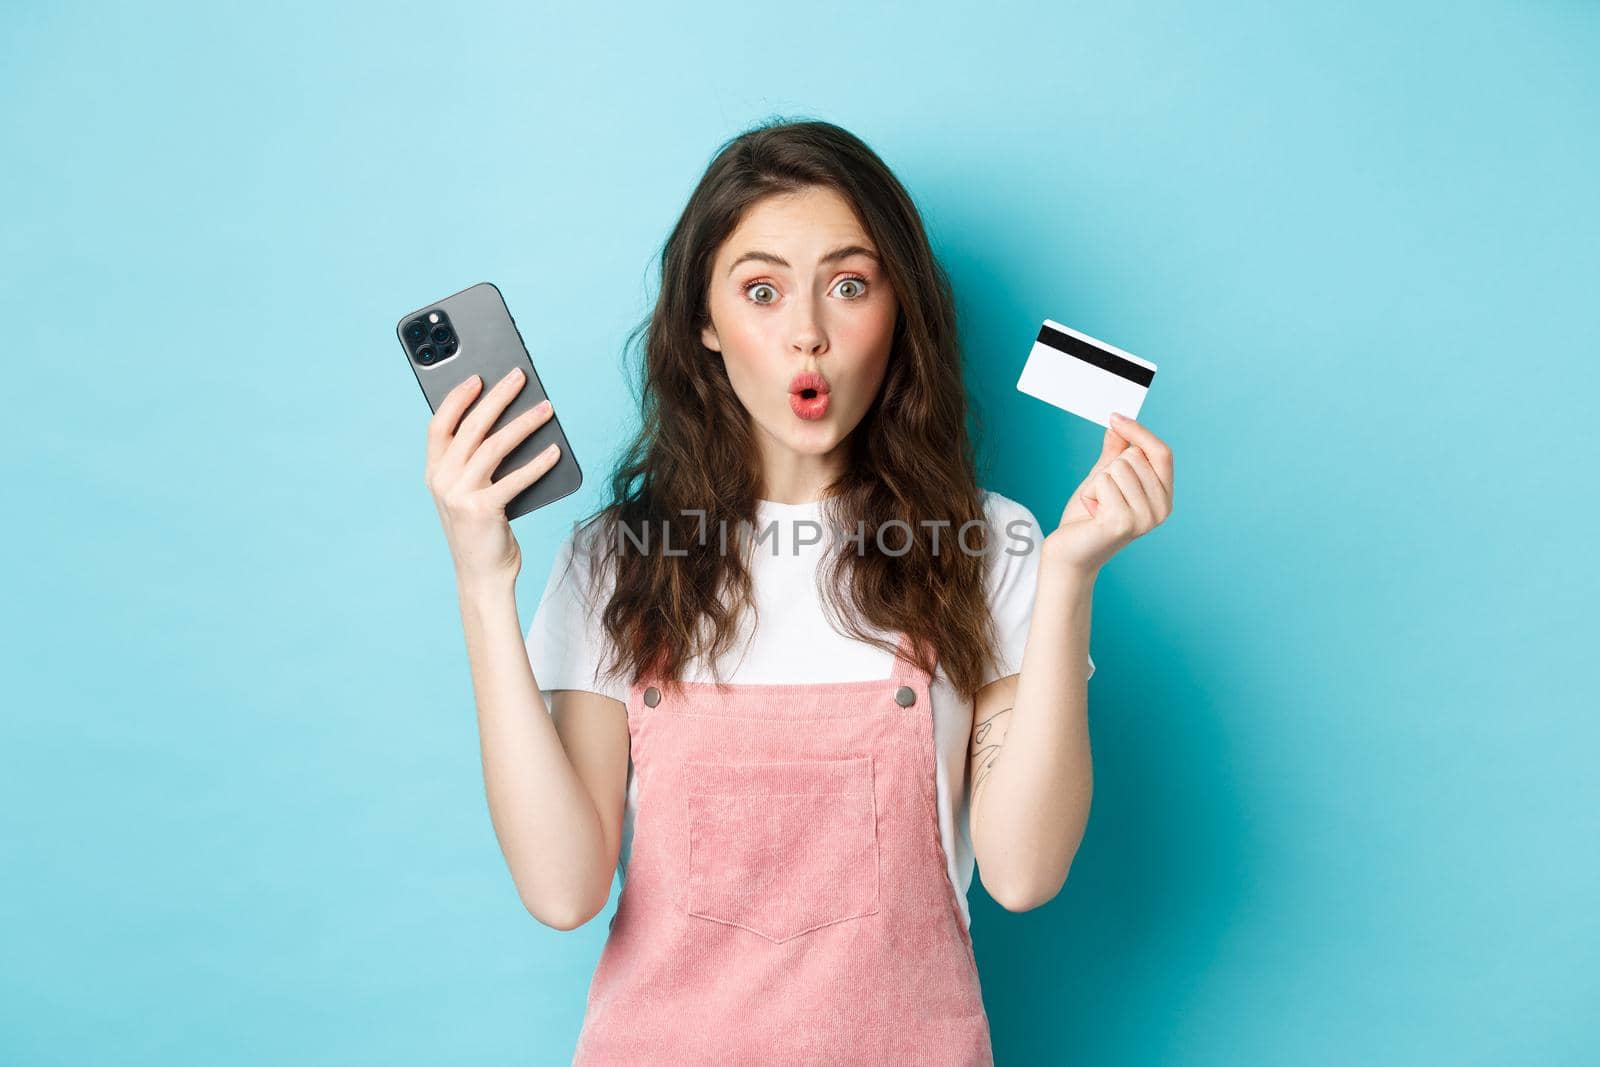 Surprised young woman say wow, stare excited at camera, holding mobile phone and plastic credit card, standing over blue background.